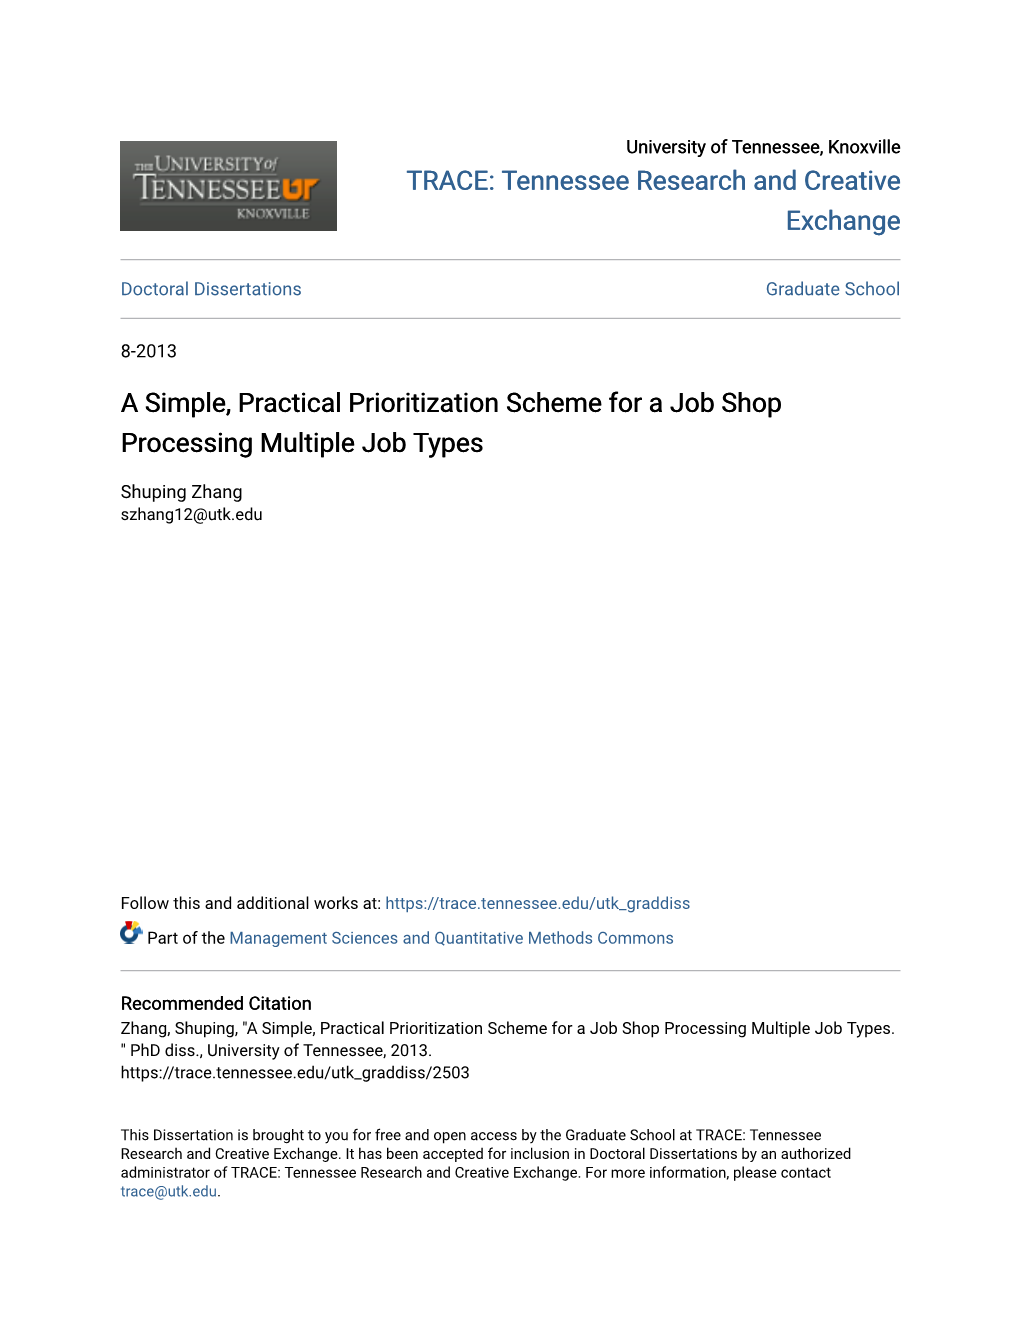 A Simple, Practical Prioritization Scheme for a Job Shop Processing Multiple Job Types